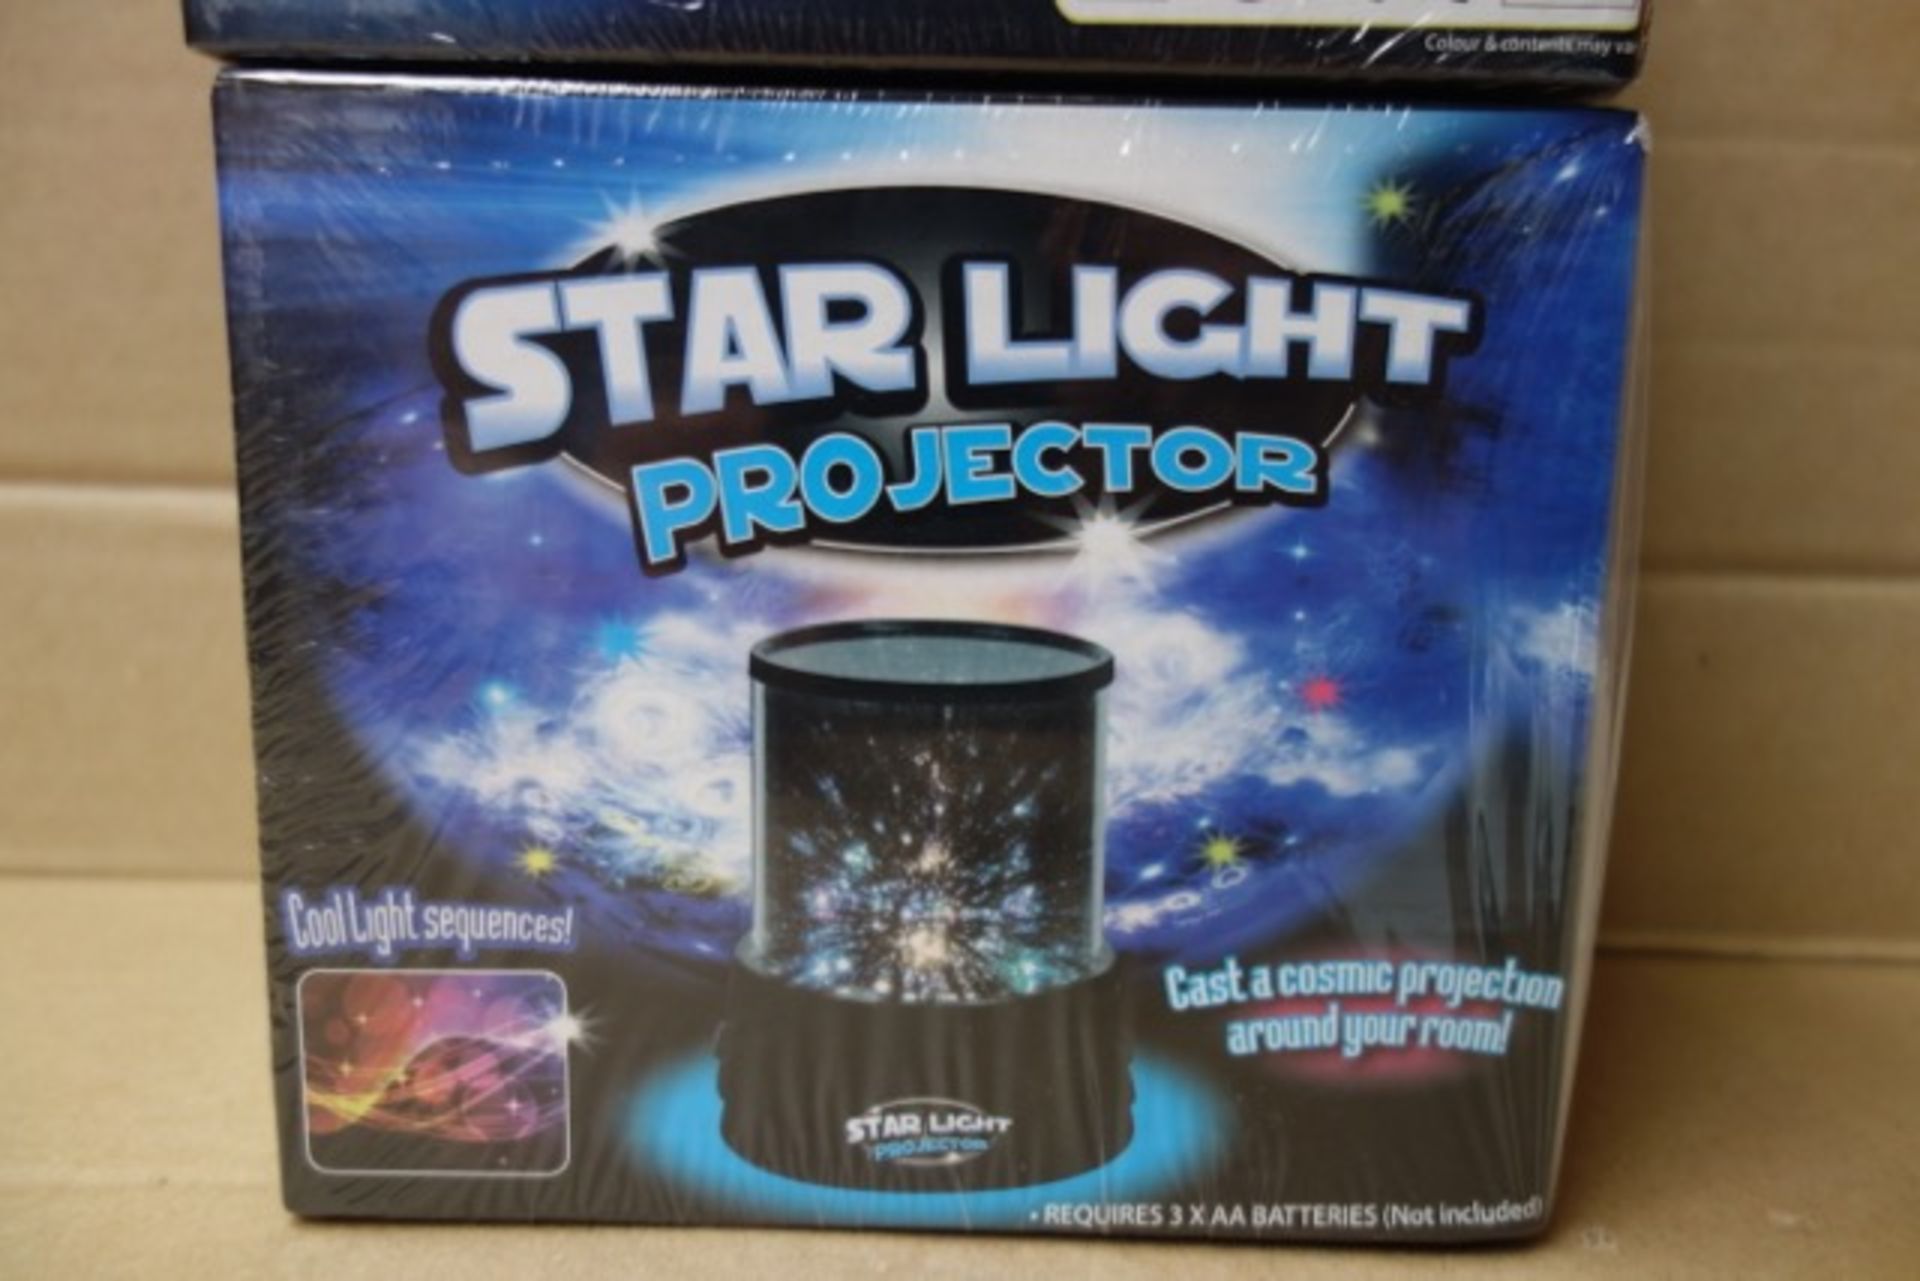 36 x Starlight Projectors. Cast a cosmic projection around your room. Cool light sequences.